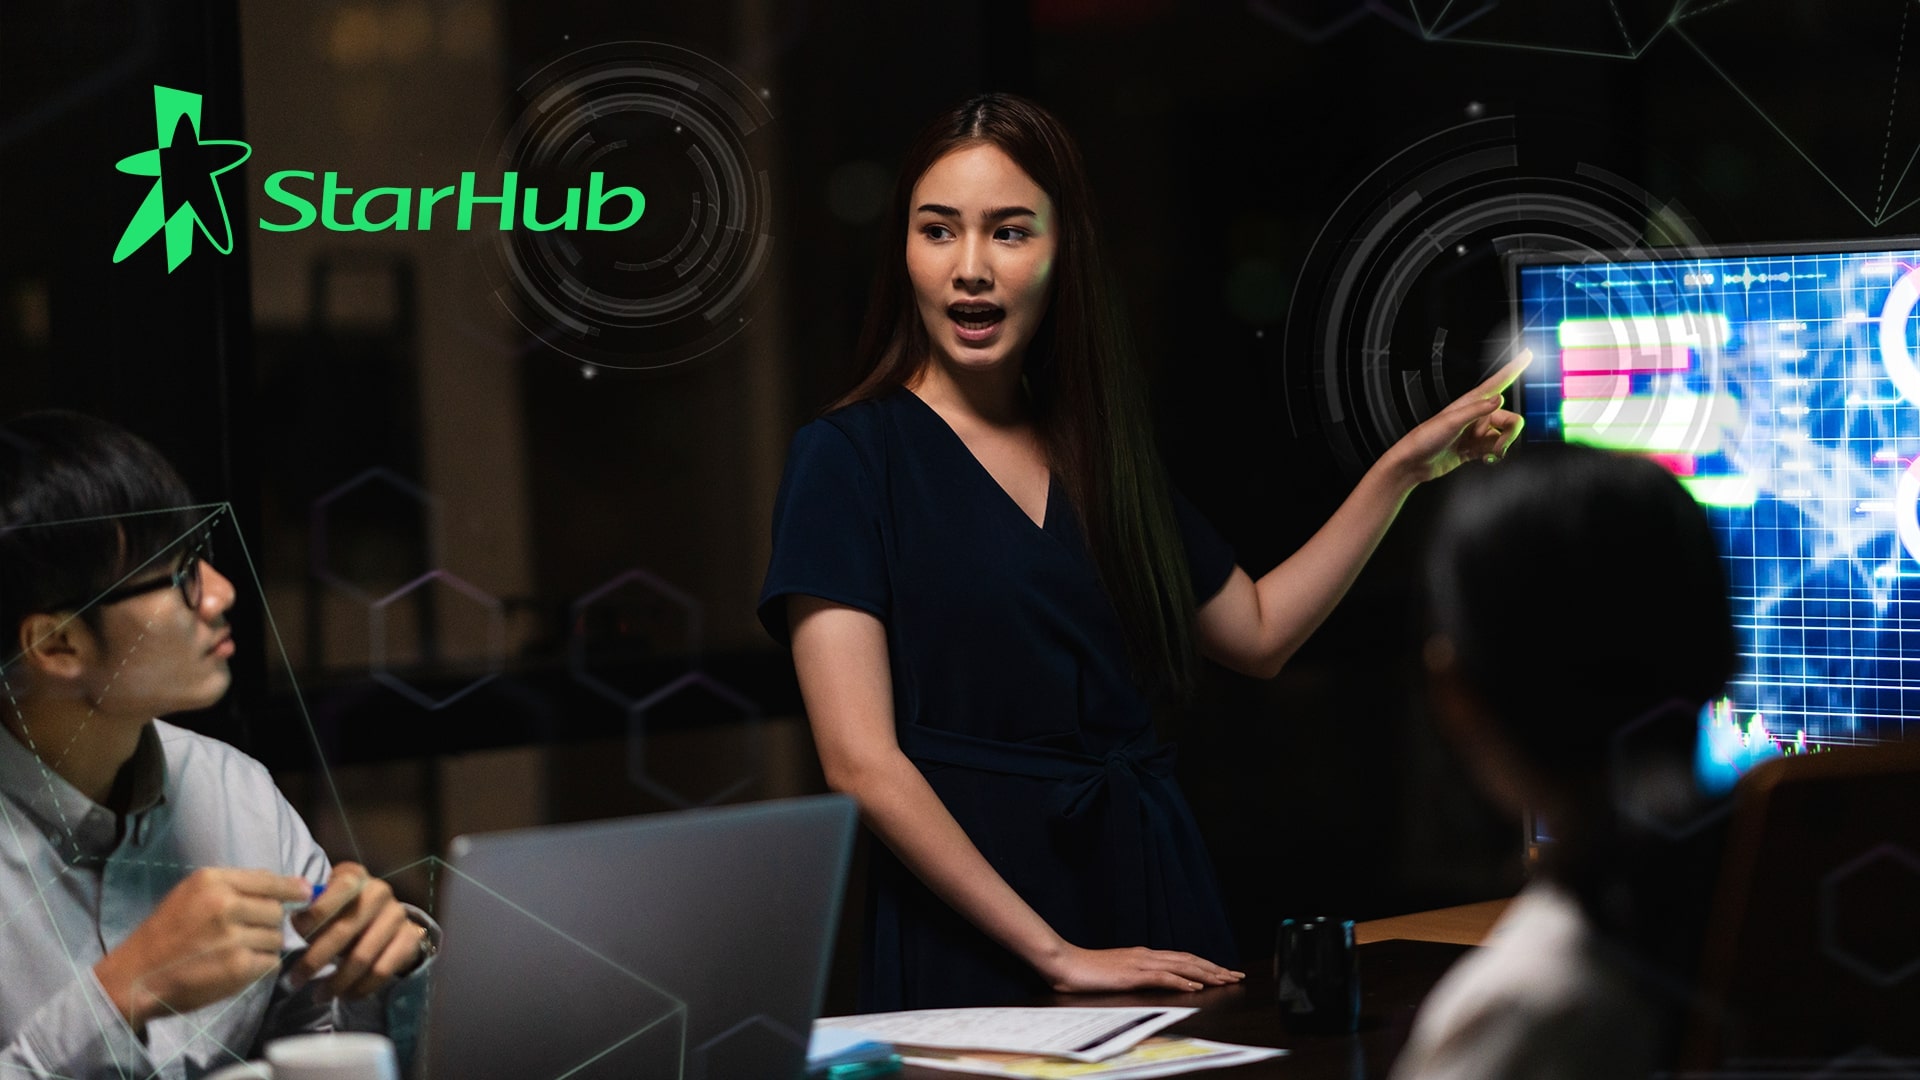 StarHub offers free digital marketing support to small business in Singapore